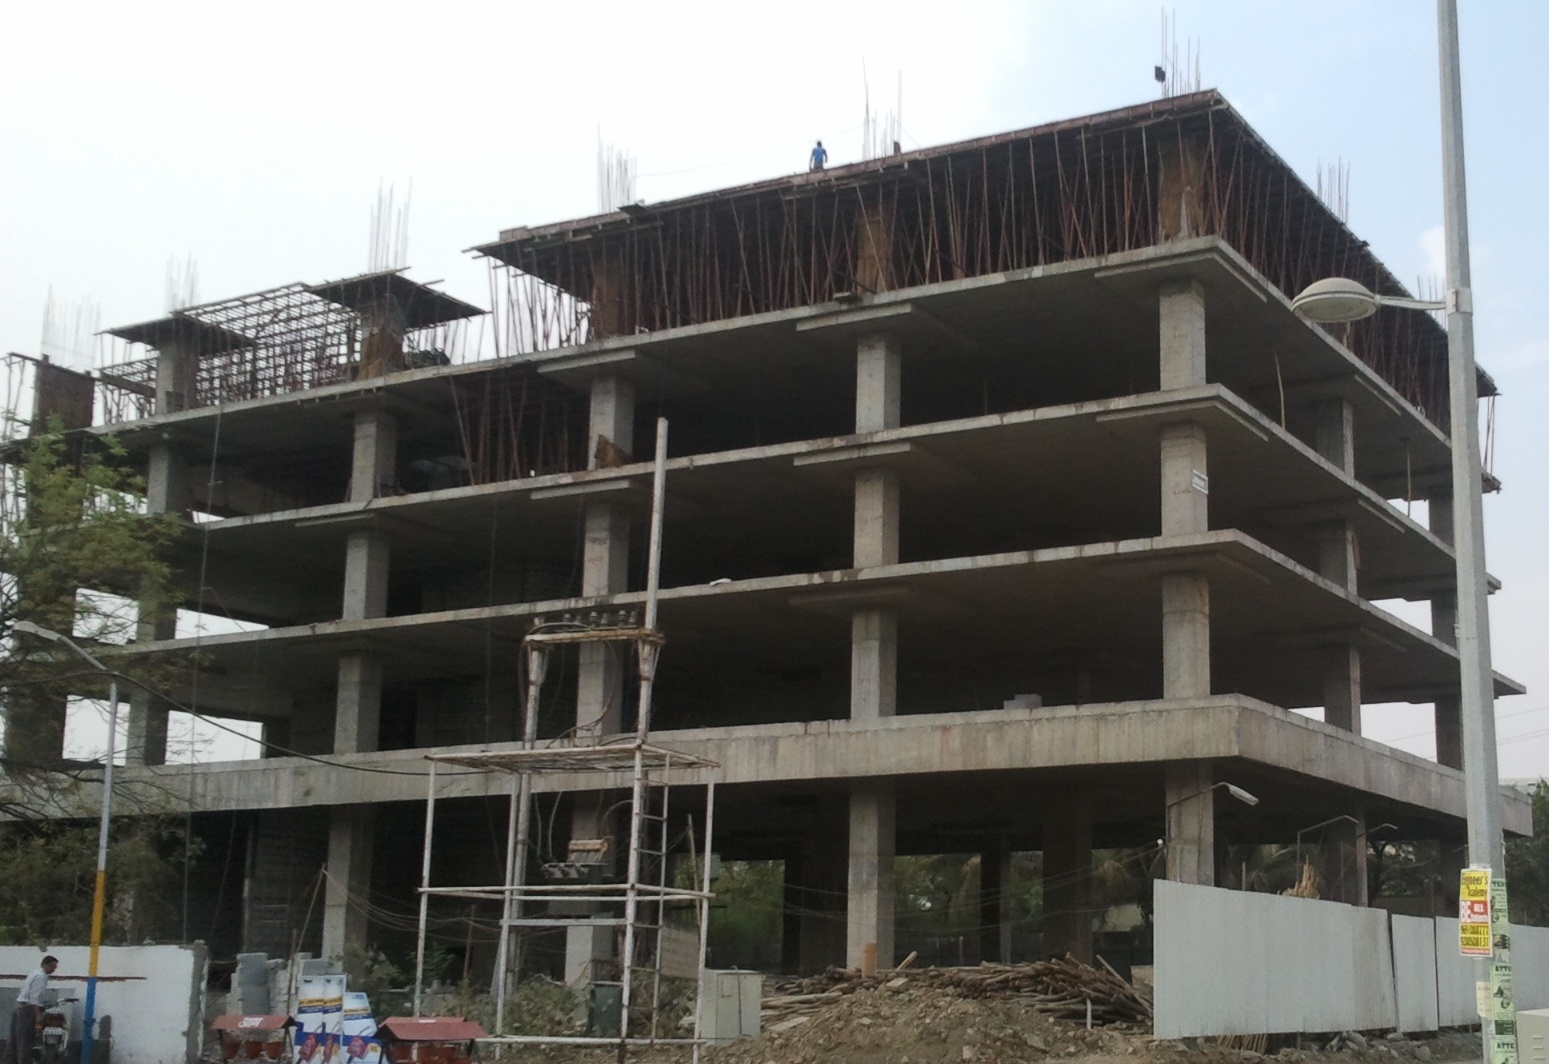 under construction multi story building at talawali chanda indore